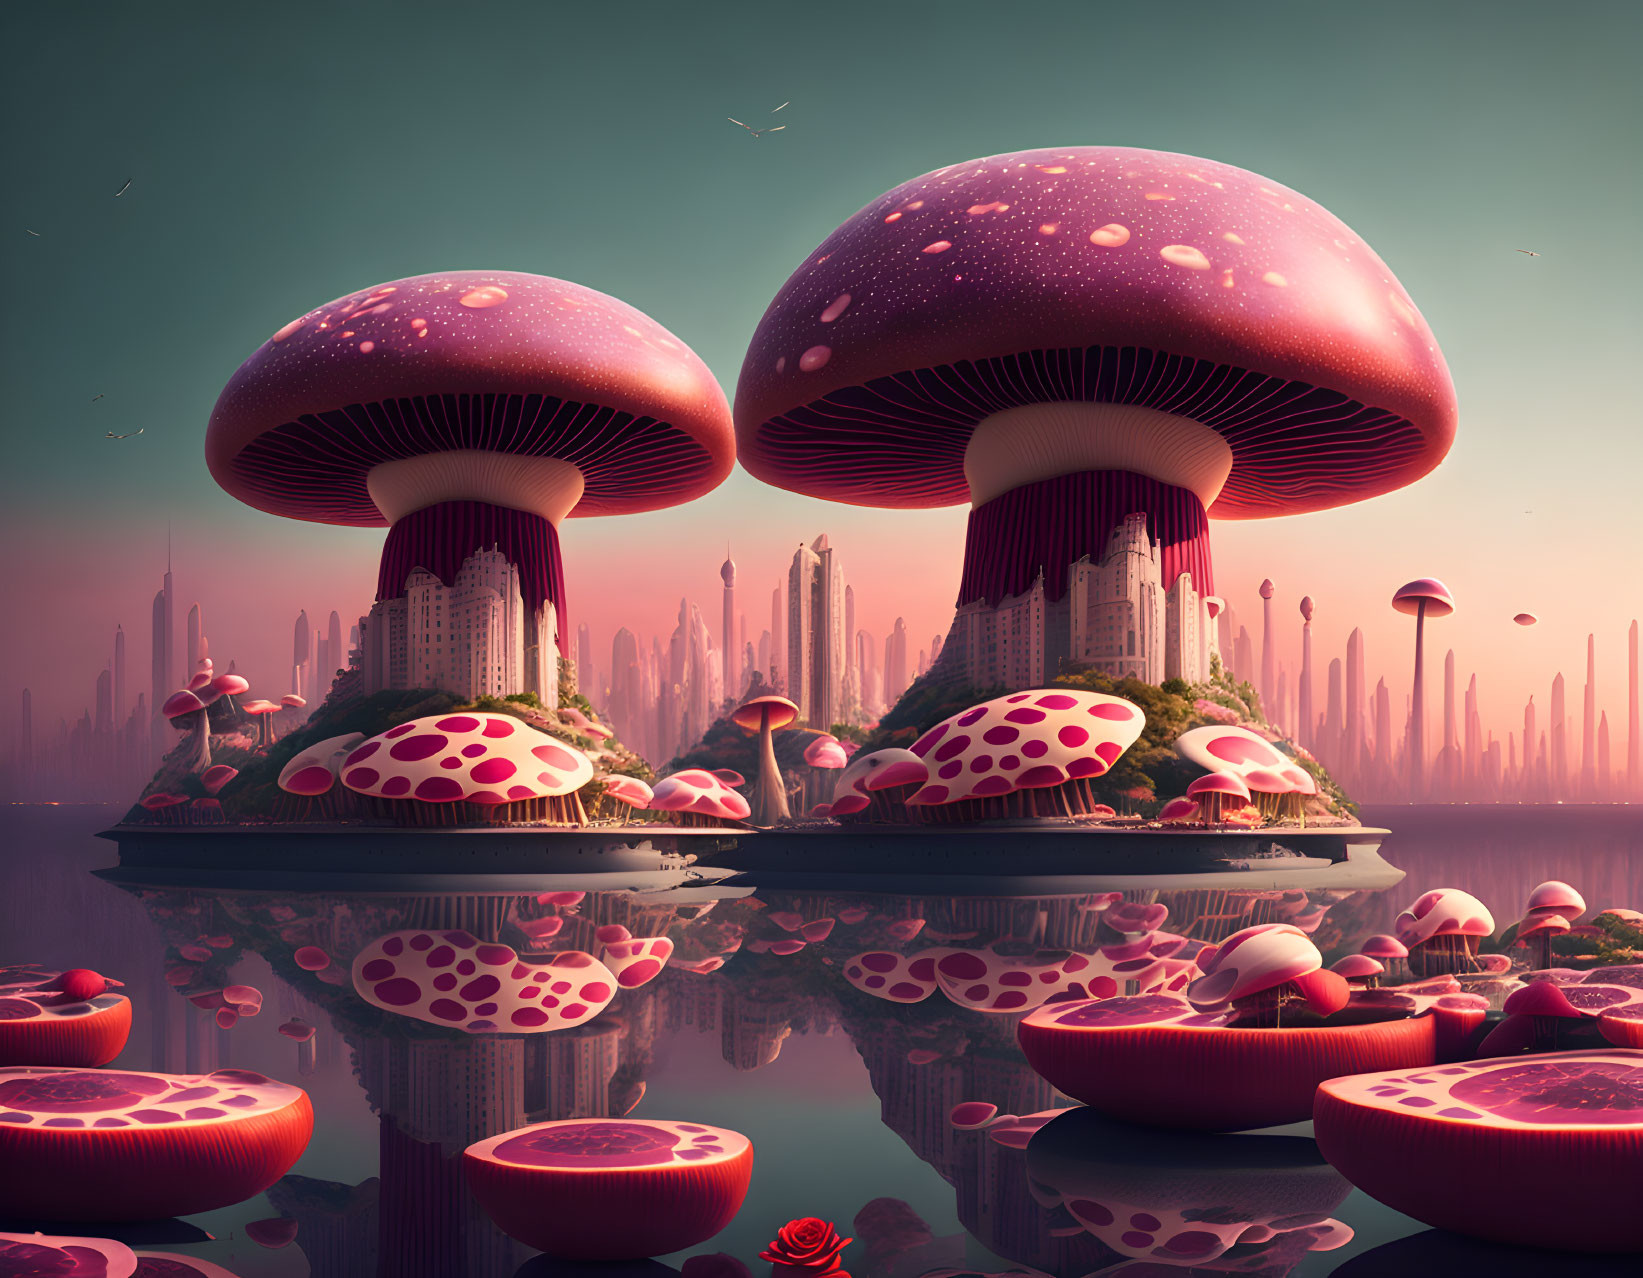 Fantastical landscape with oversized mushroom structures and city silhouette reflected in water against pink sky.